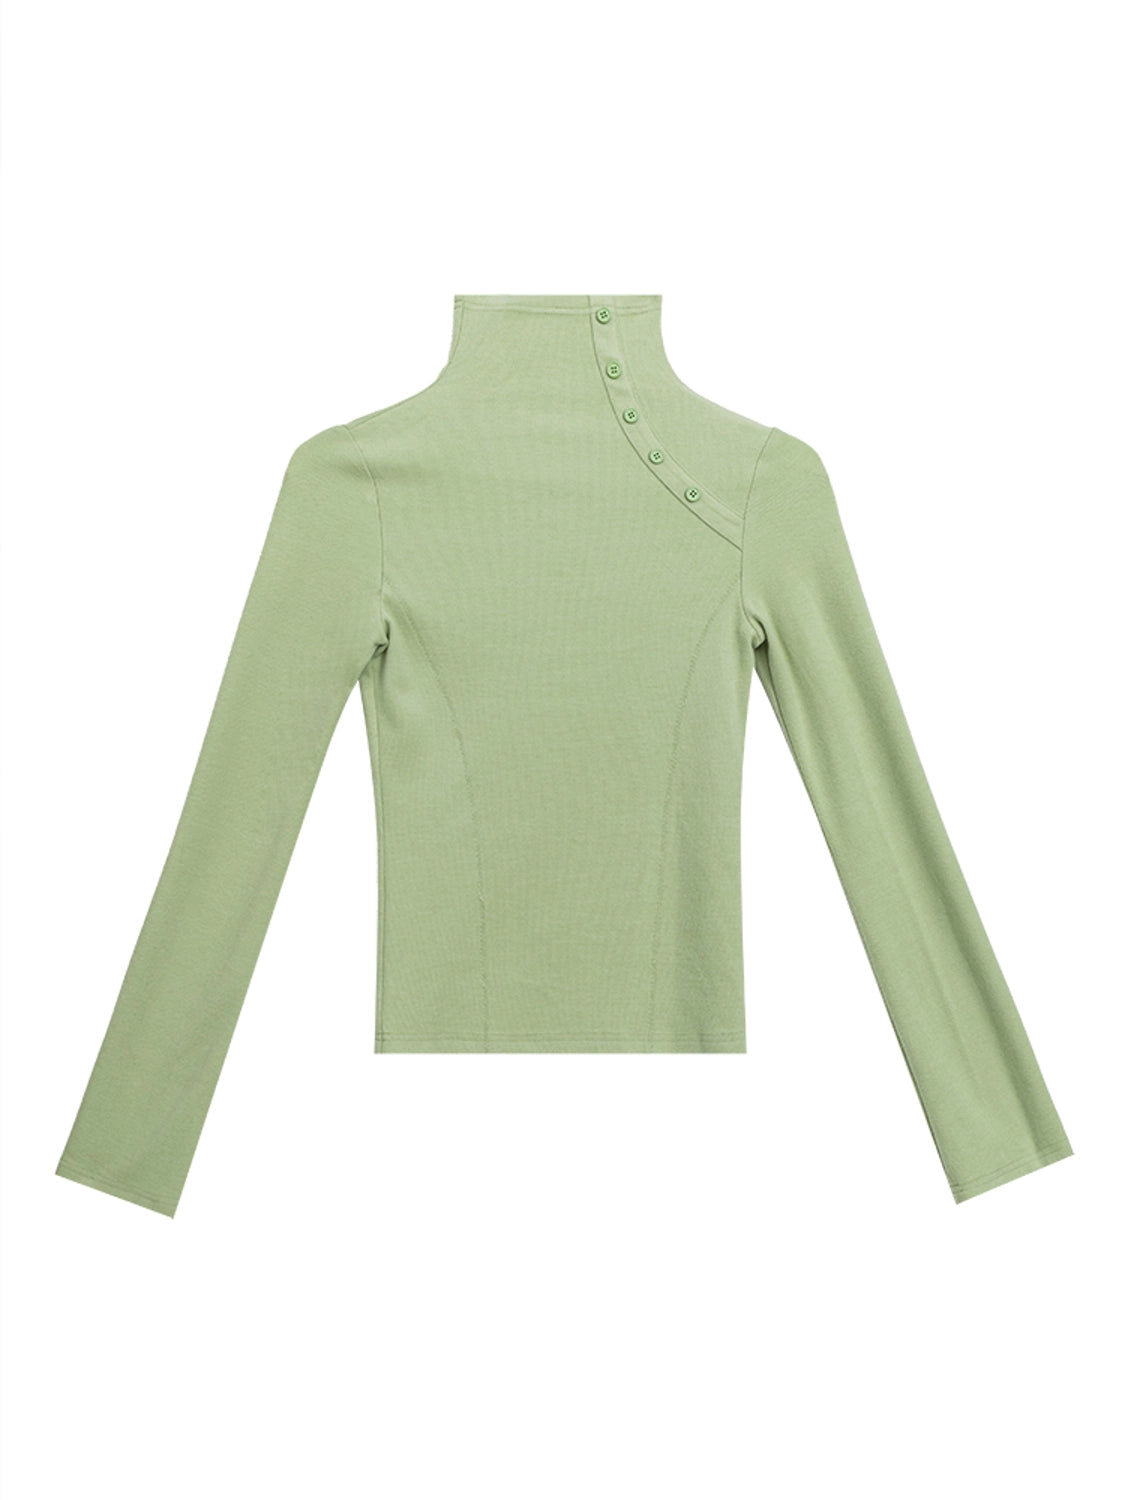 Women's Slim Fit Ribbed Turtleneck - Long Sleeve Knit Base Layer for Fall/Winter